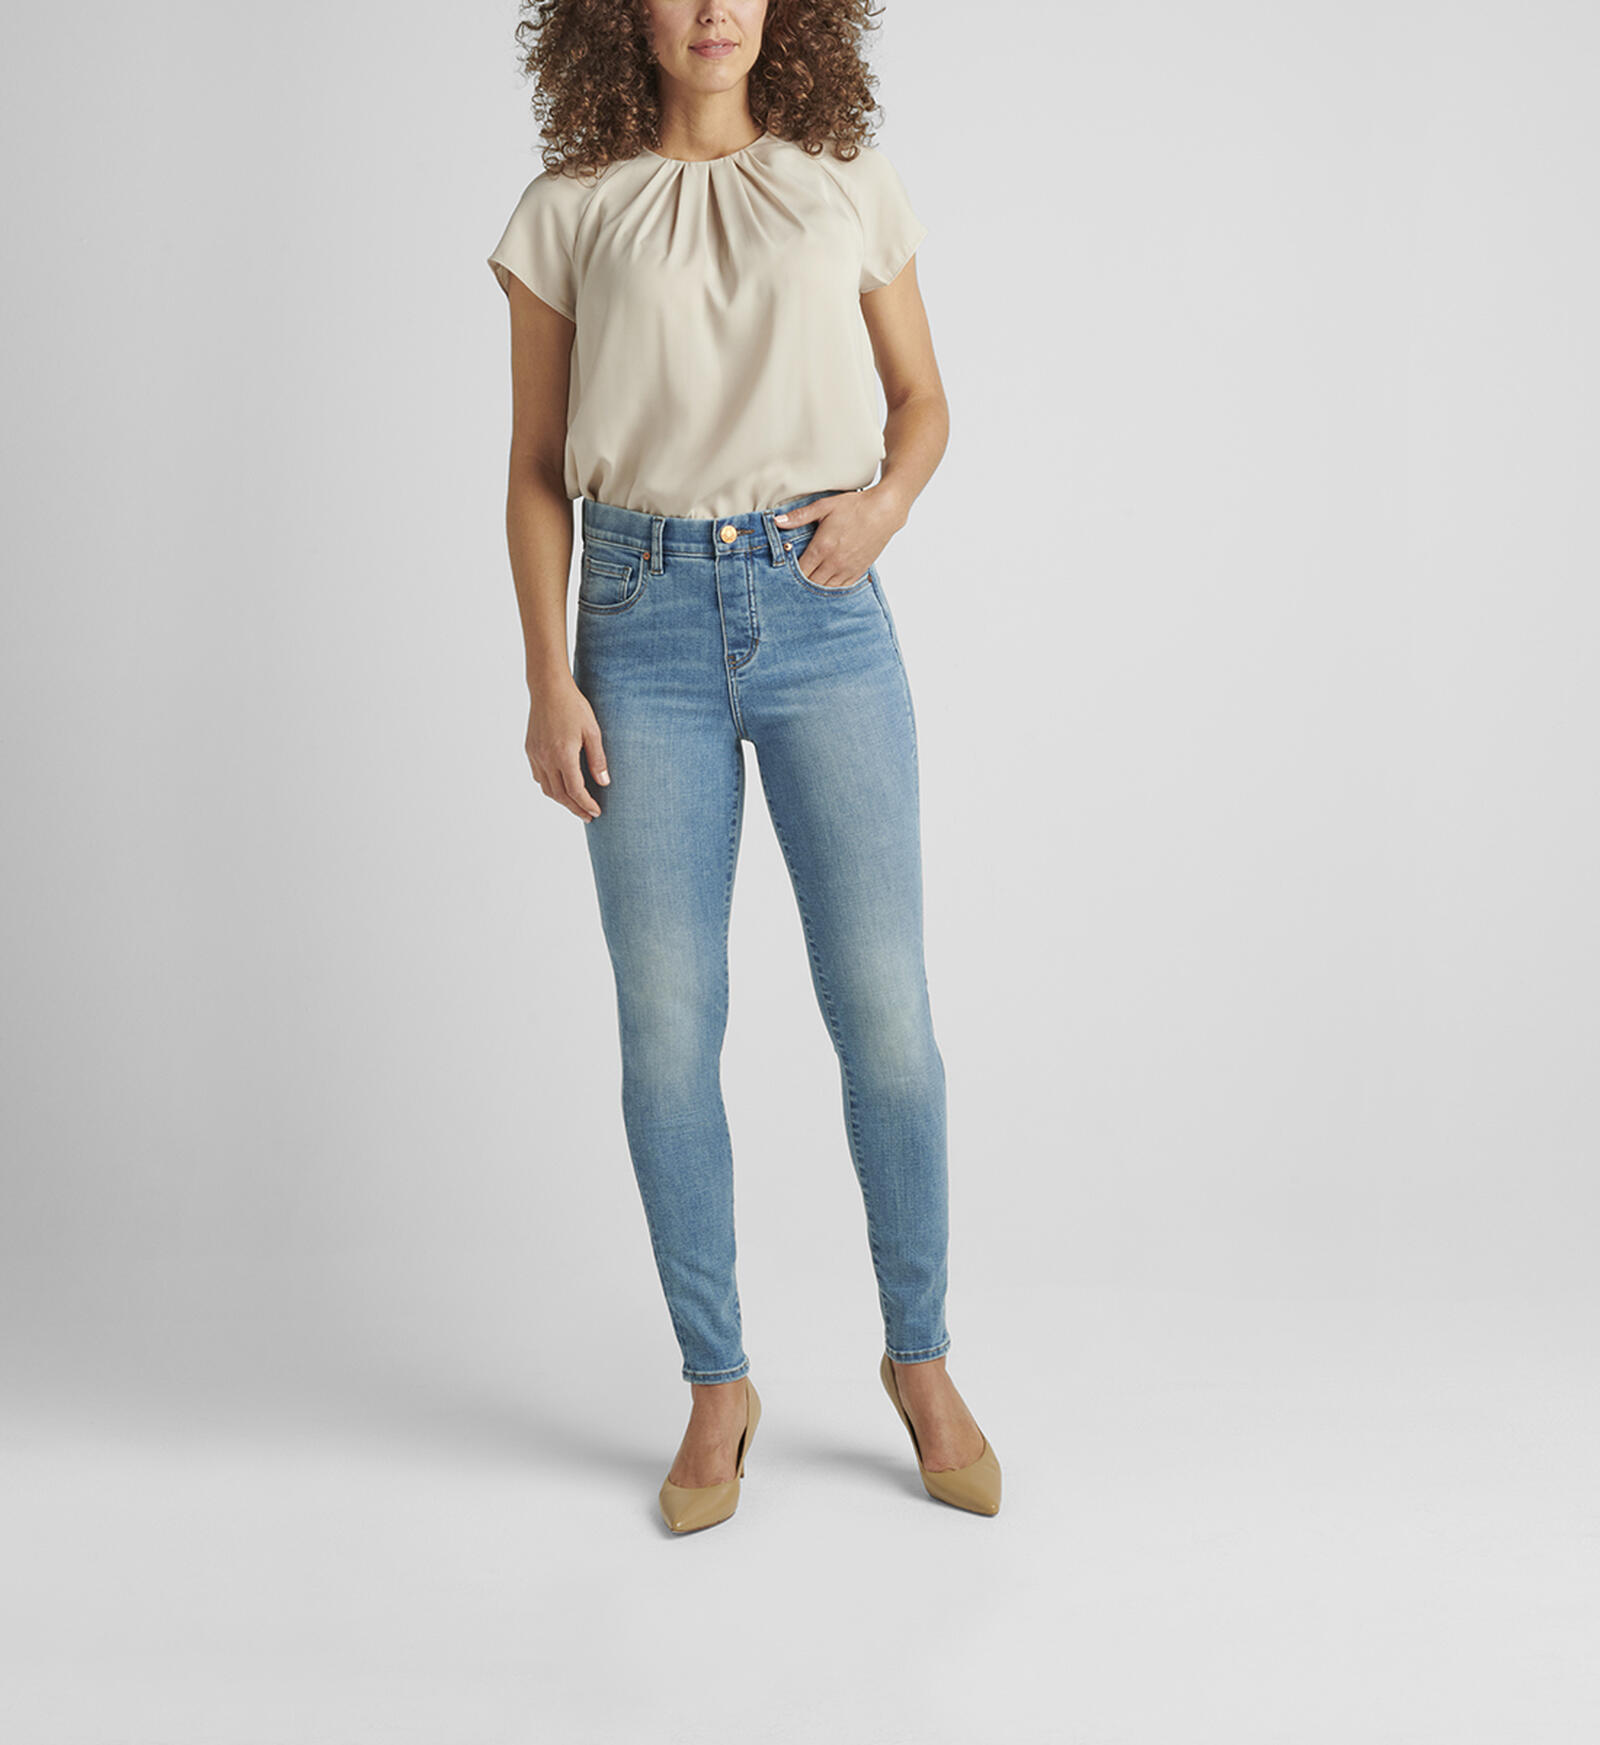 Jeans for Women - Ricki's Canada